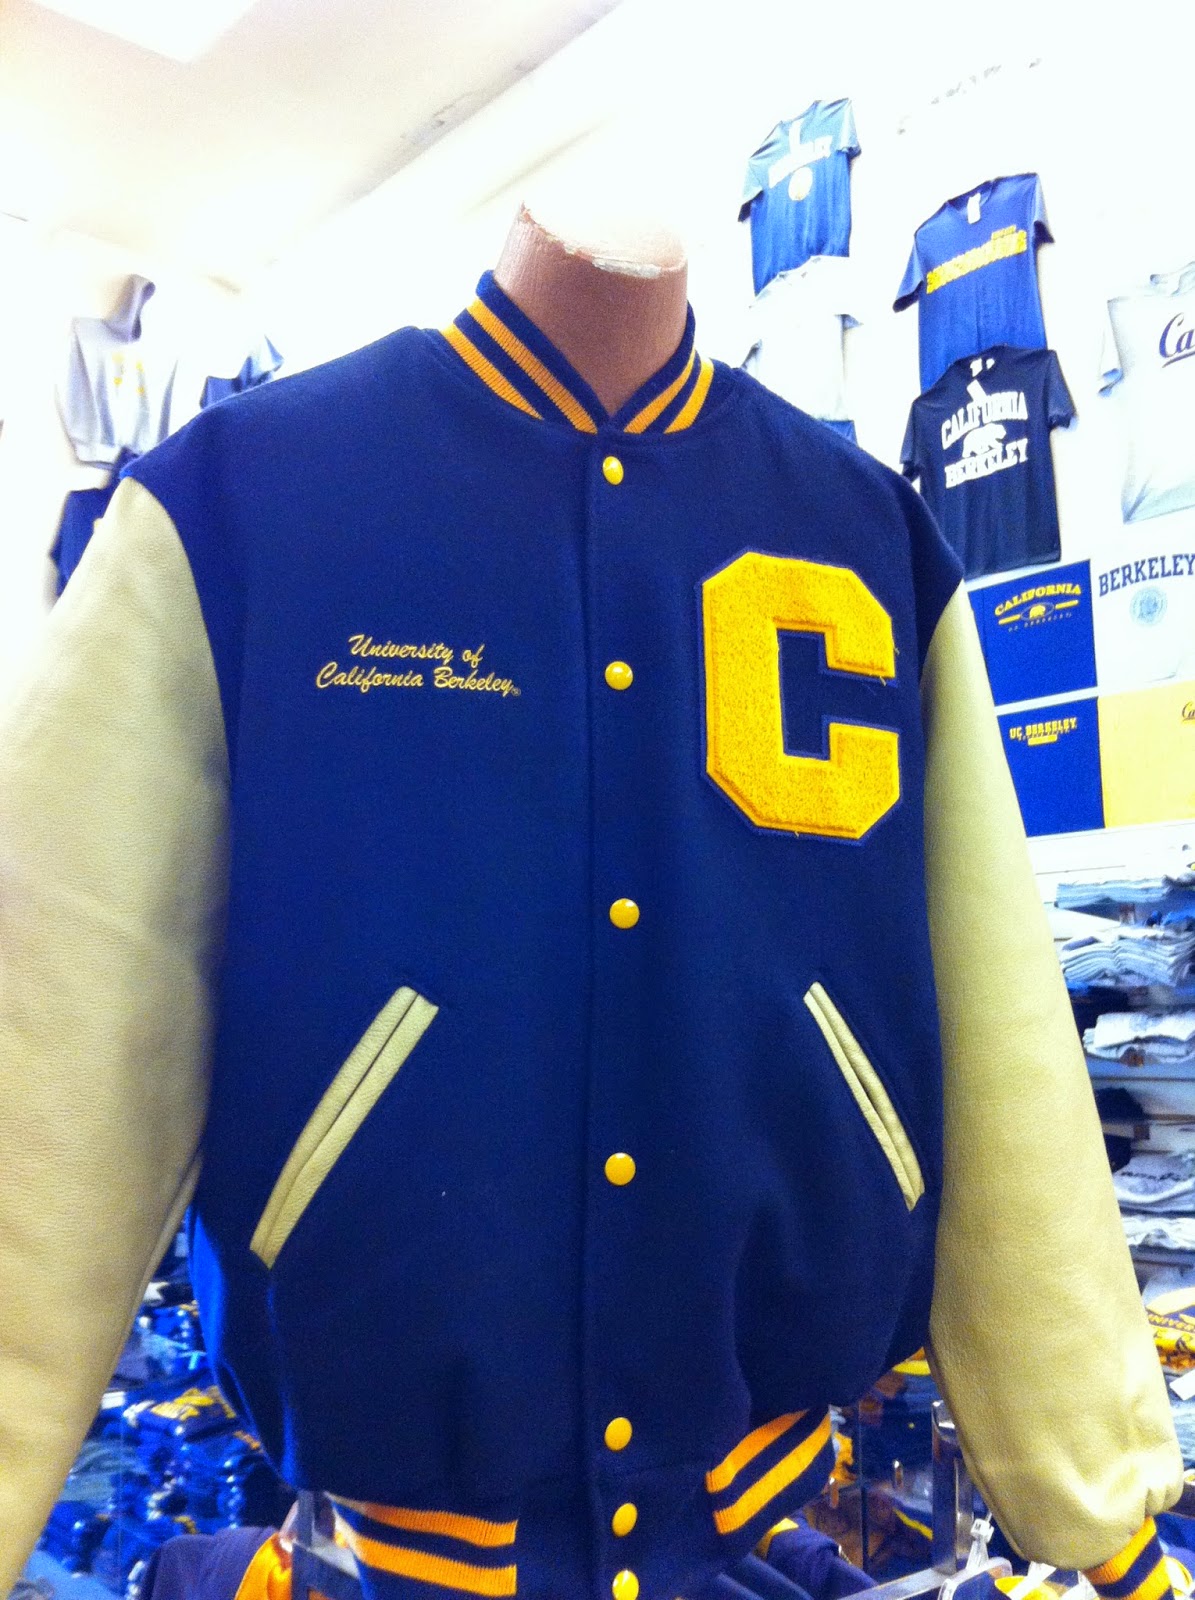 Jacket from the University of California